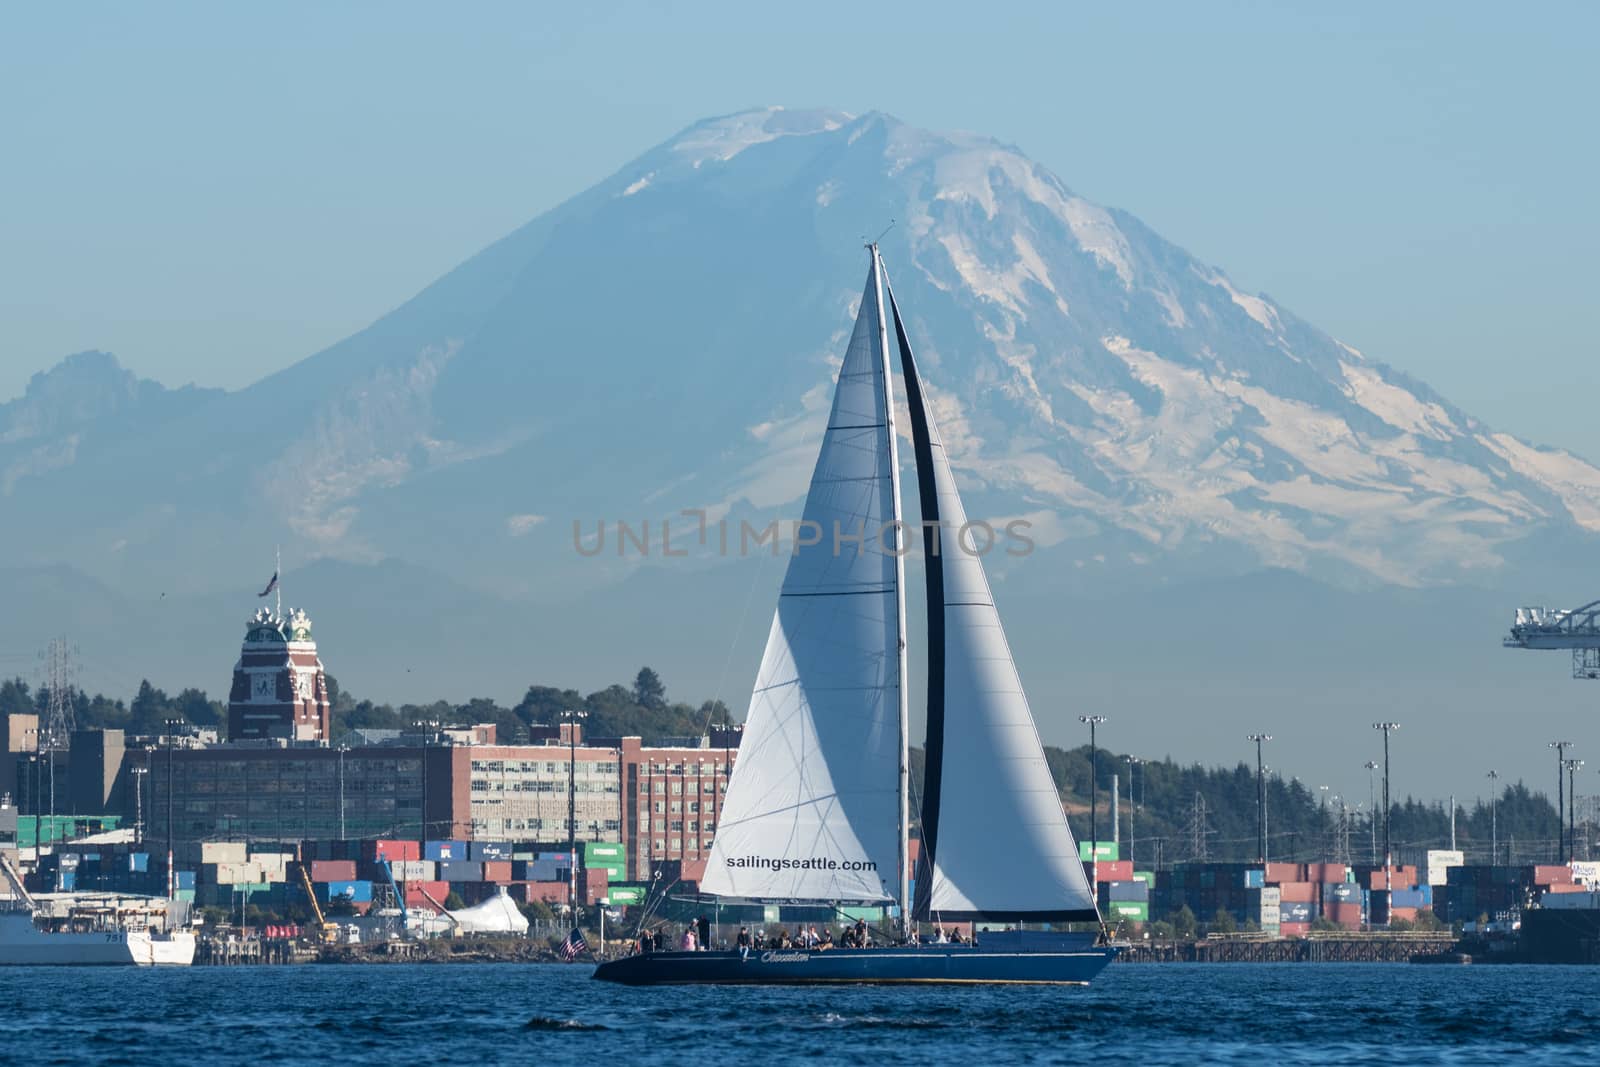 A popular Seattle attraction is taking an afternoon or sunset sail on board S/V Obsession